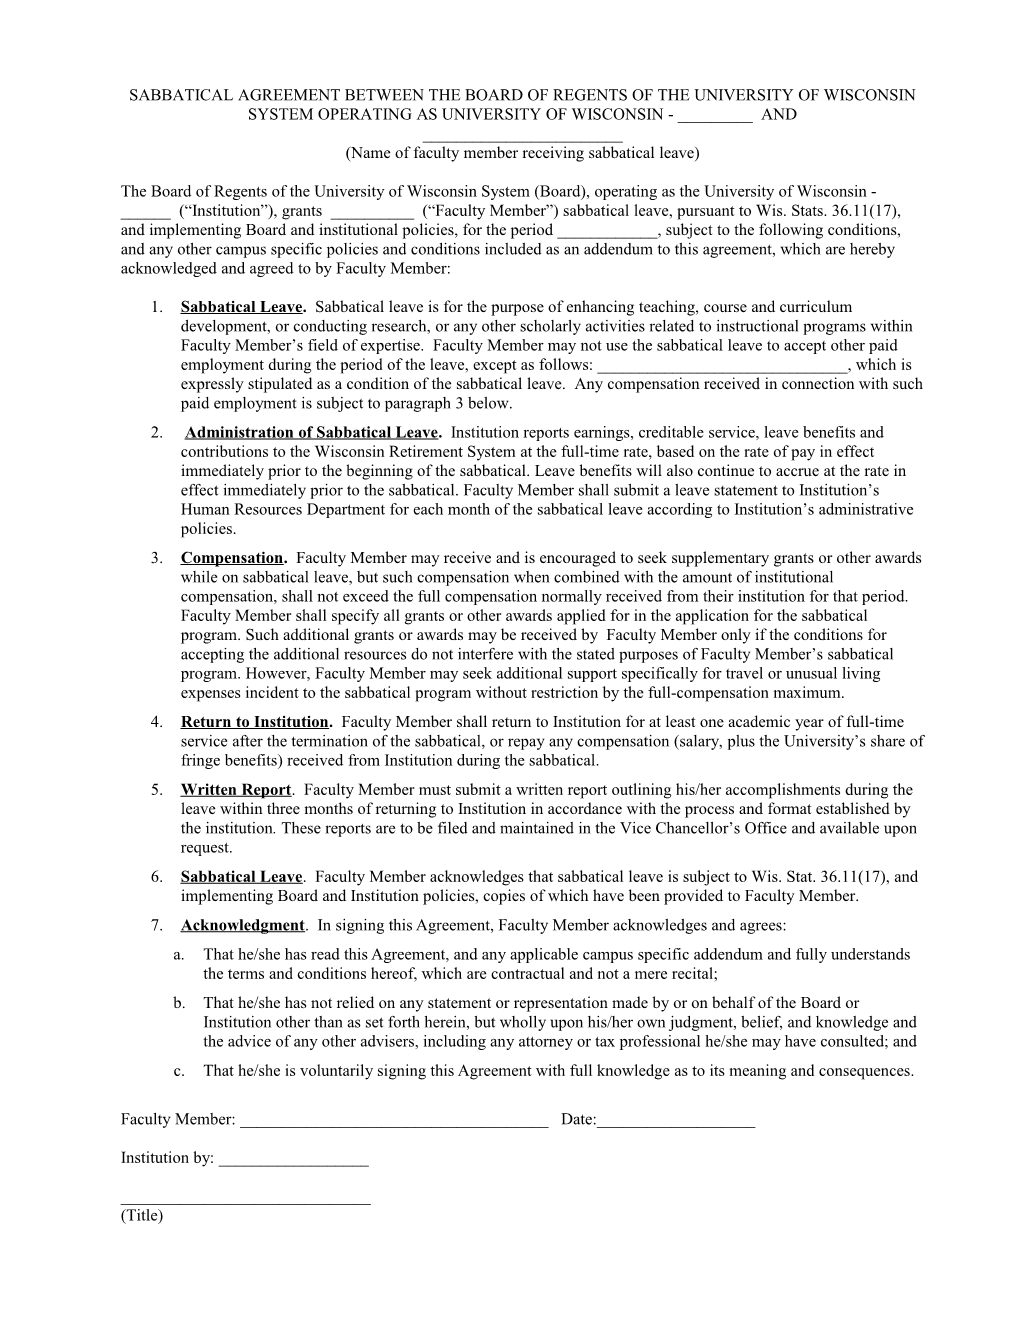 Standard Agreement Between University of Wisconsin System And